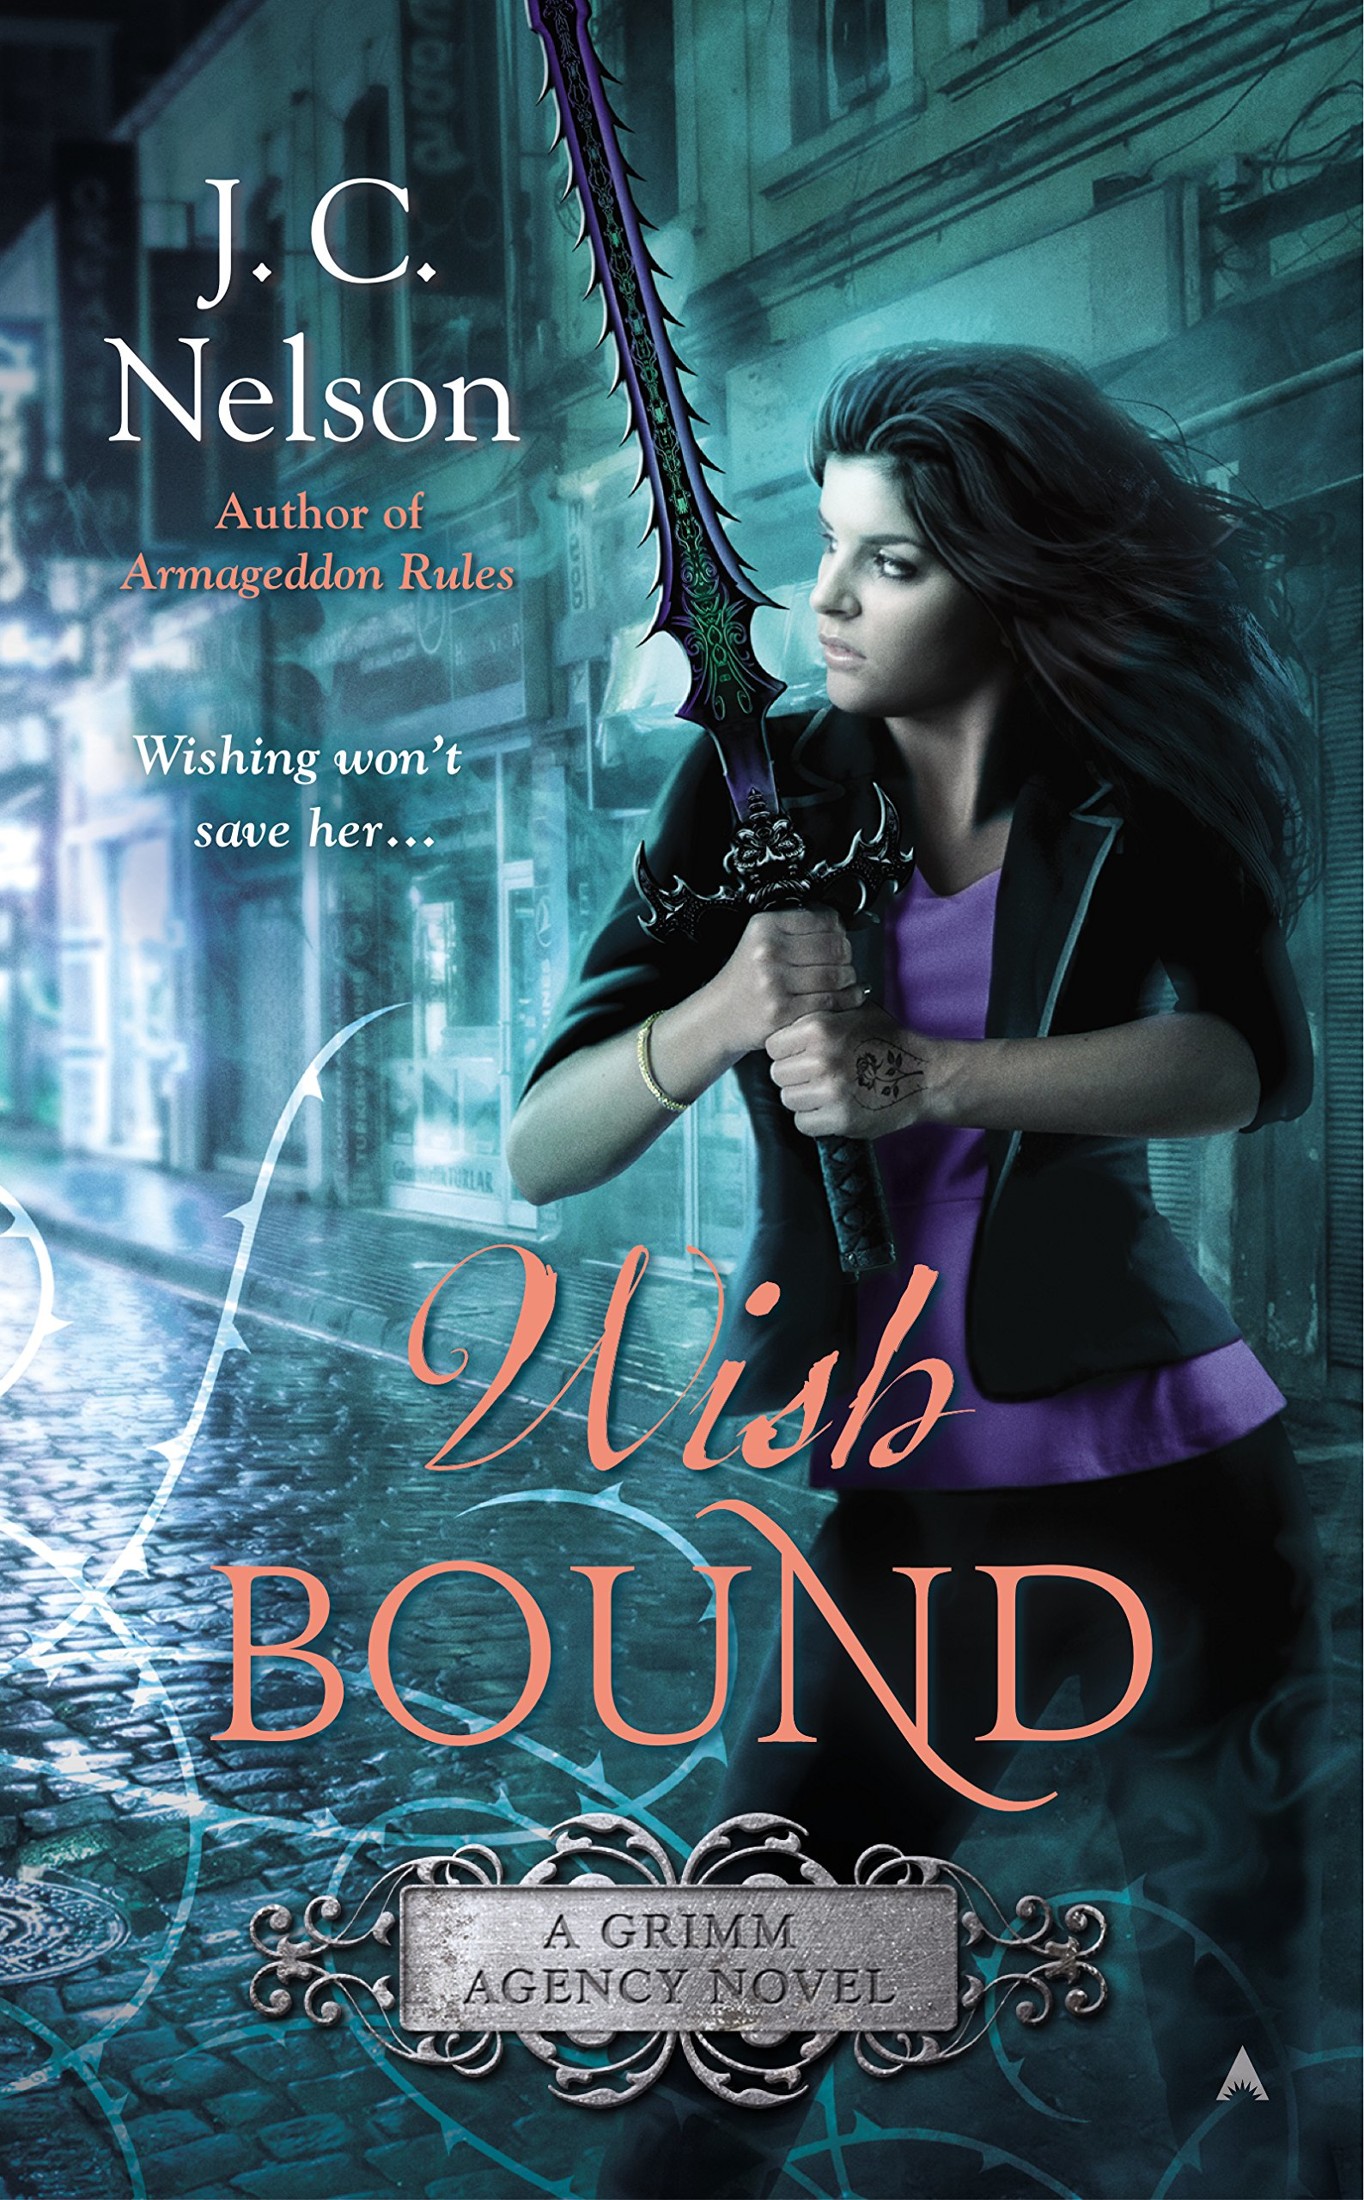 Wish Bound (A Grimm Agency Novel Book 3)